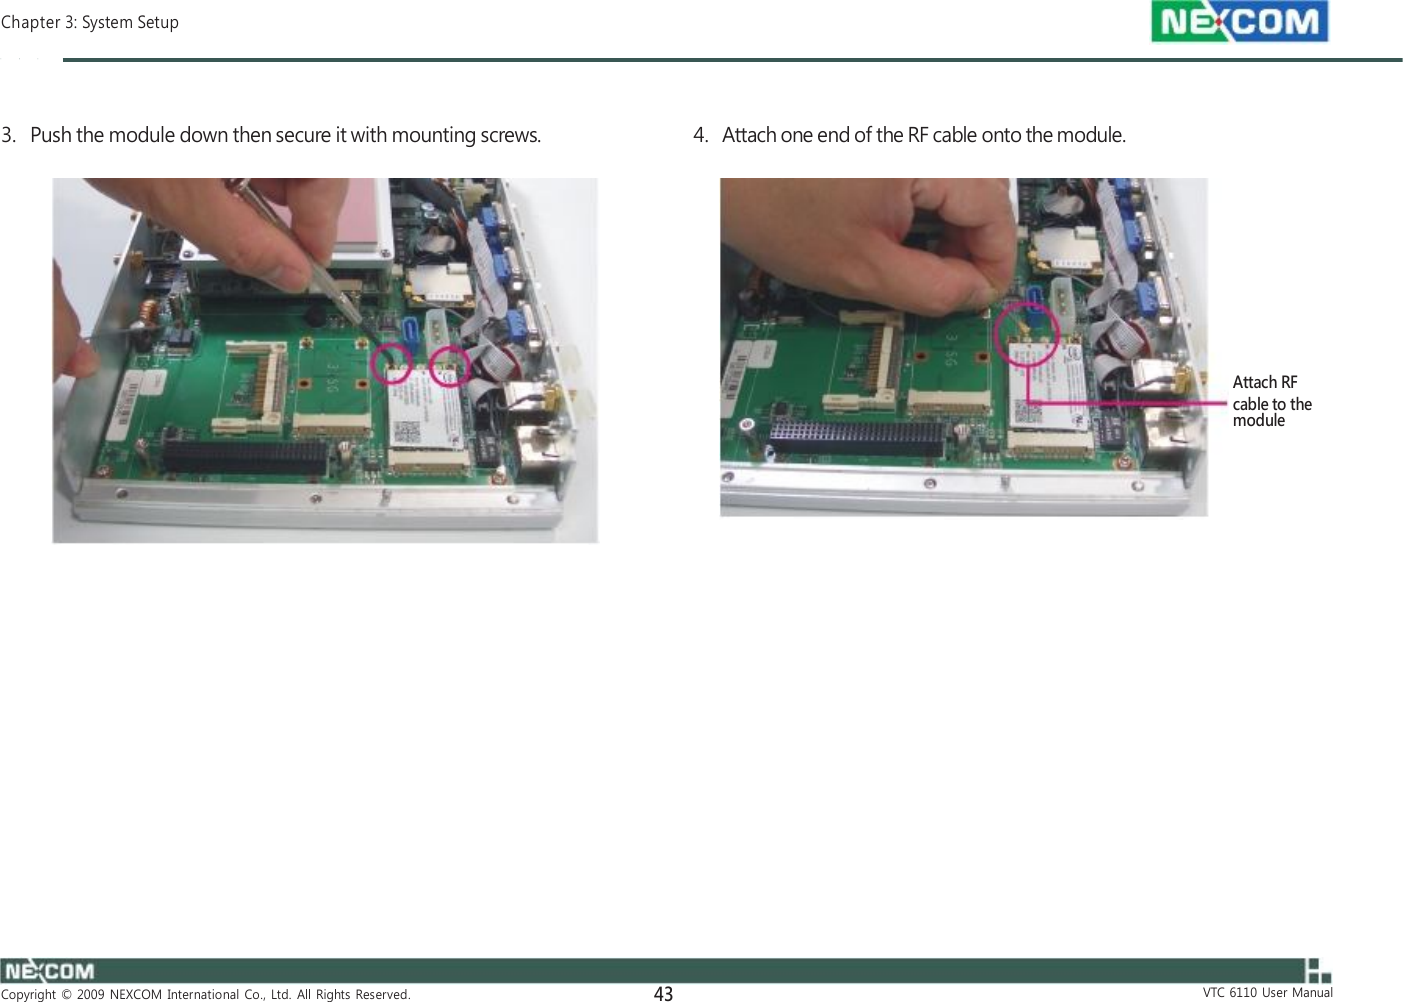  Chapter 3: System Setup    3.   Push the module down then secure it with mounting screws.    4.   Attach one end of the RF cable onto the module.              Attach RF cable to the module                       Copyright  ©  2009  NEXCOM  International  Co.,  Ltd.  All  Rights  Reserved. 43                       VTC  6110  User  Manual 